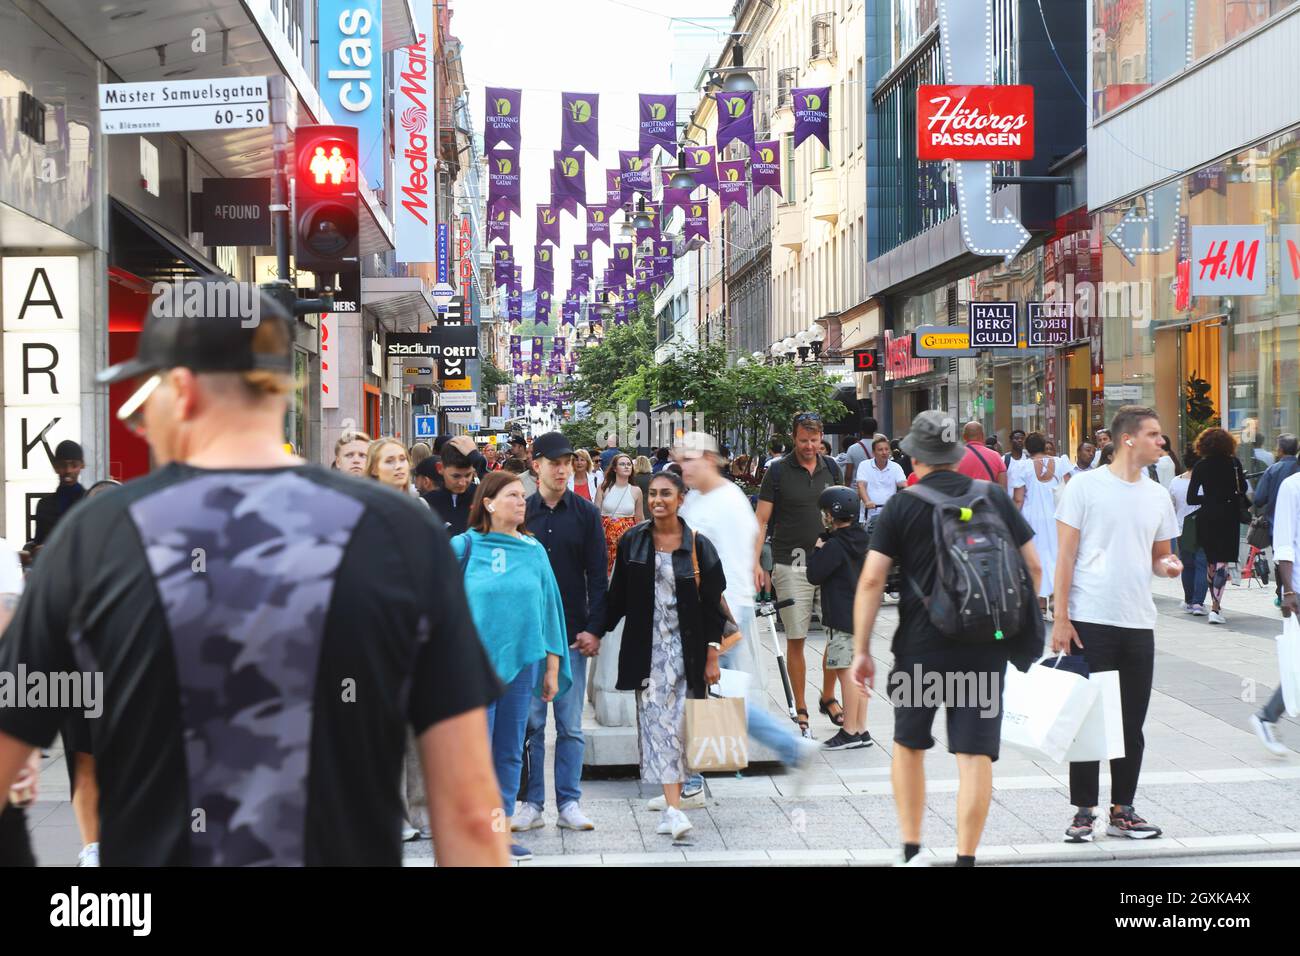 Stockholm, Sweden - July 29, 2021: View of the busy pedestrian only Drottninggatan street in downtown Stockholm. Stock Photo